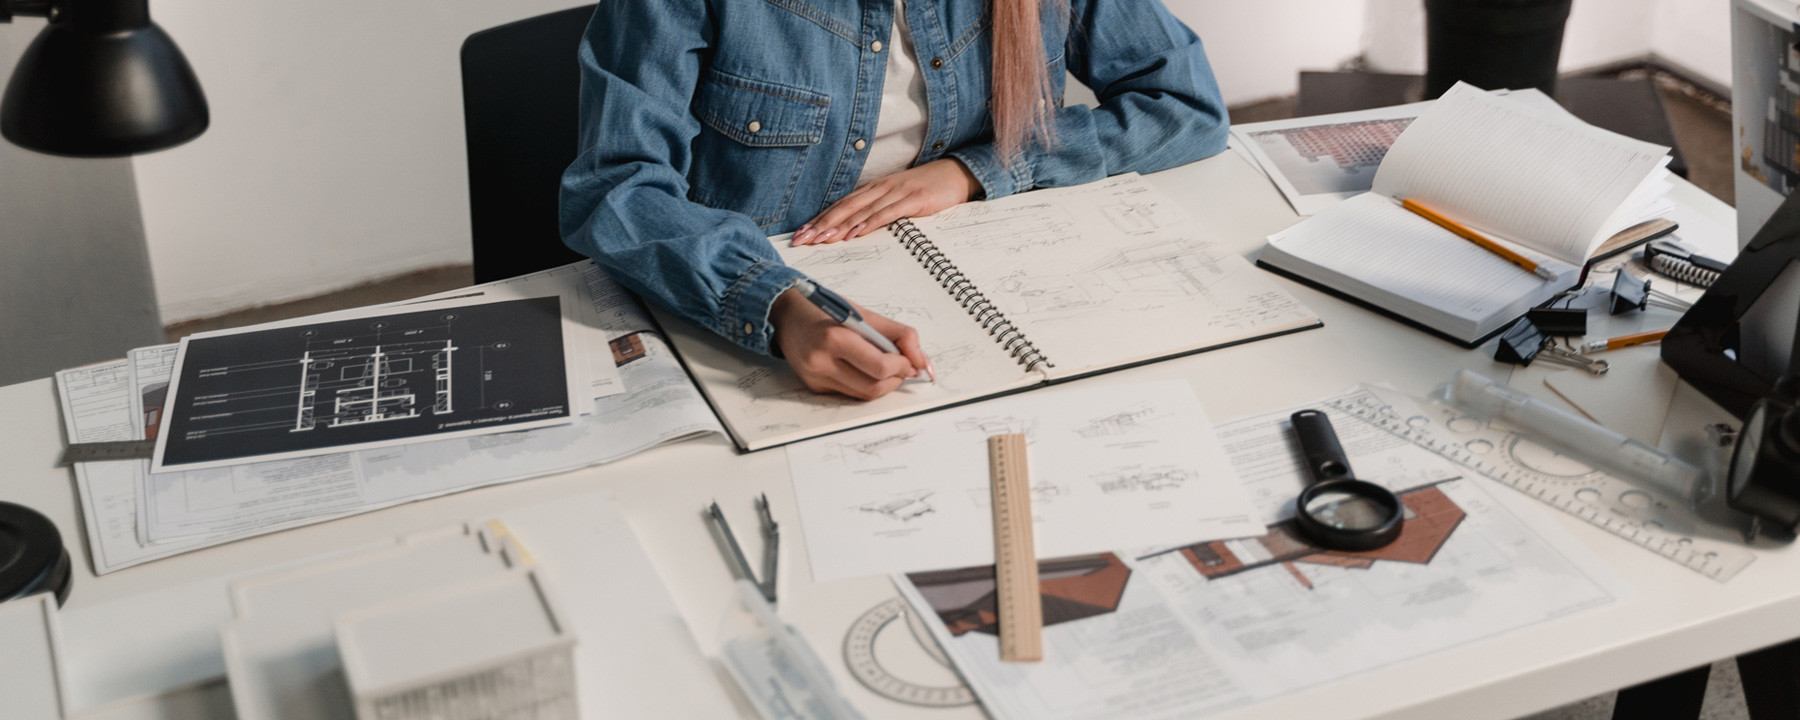 An architect sits at a desk with paper work and drawings.